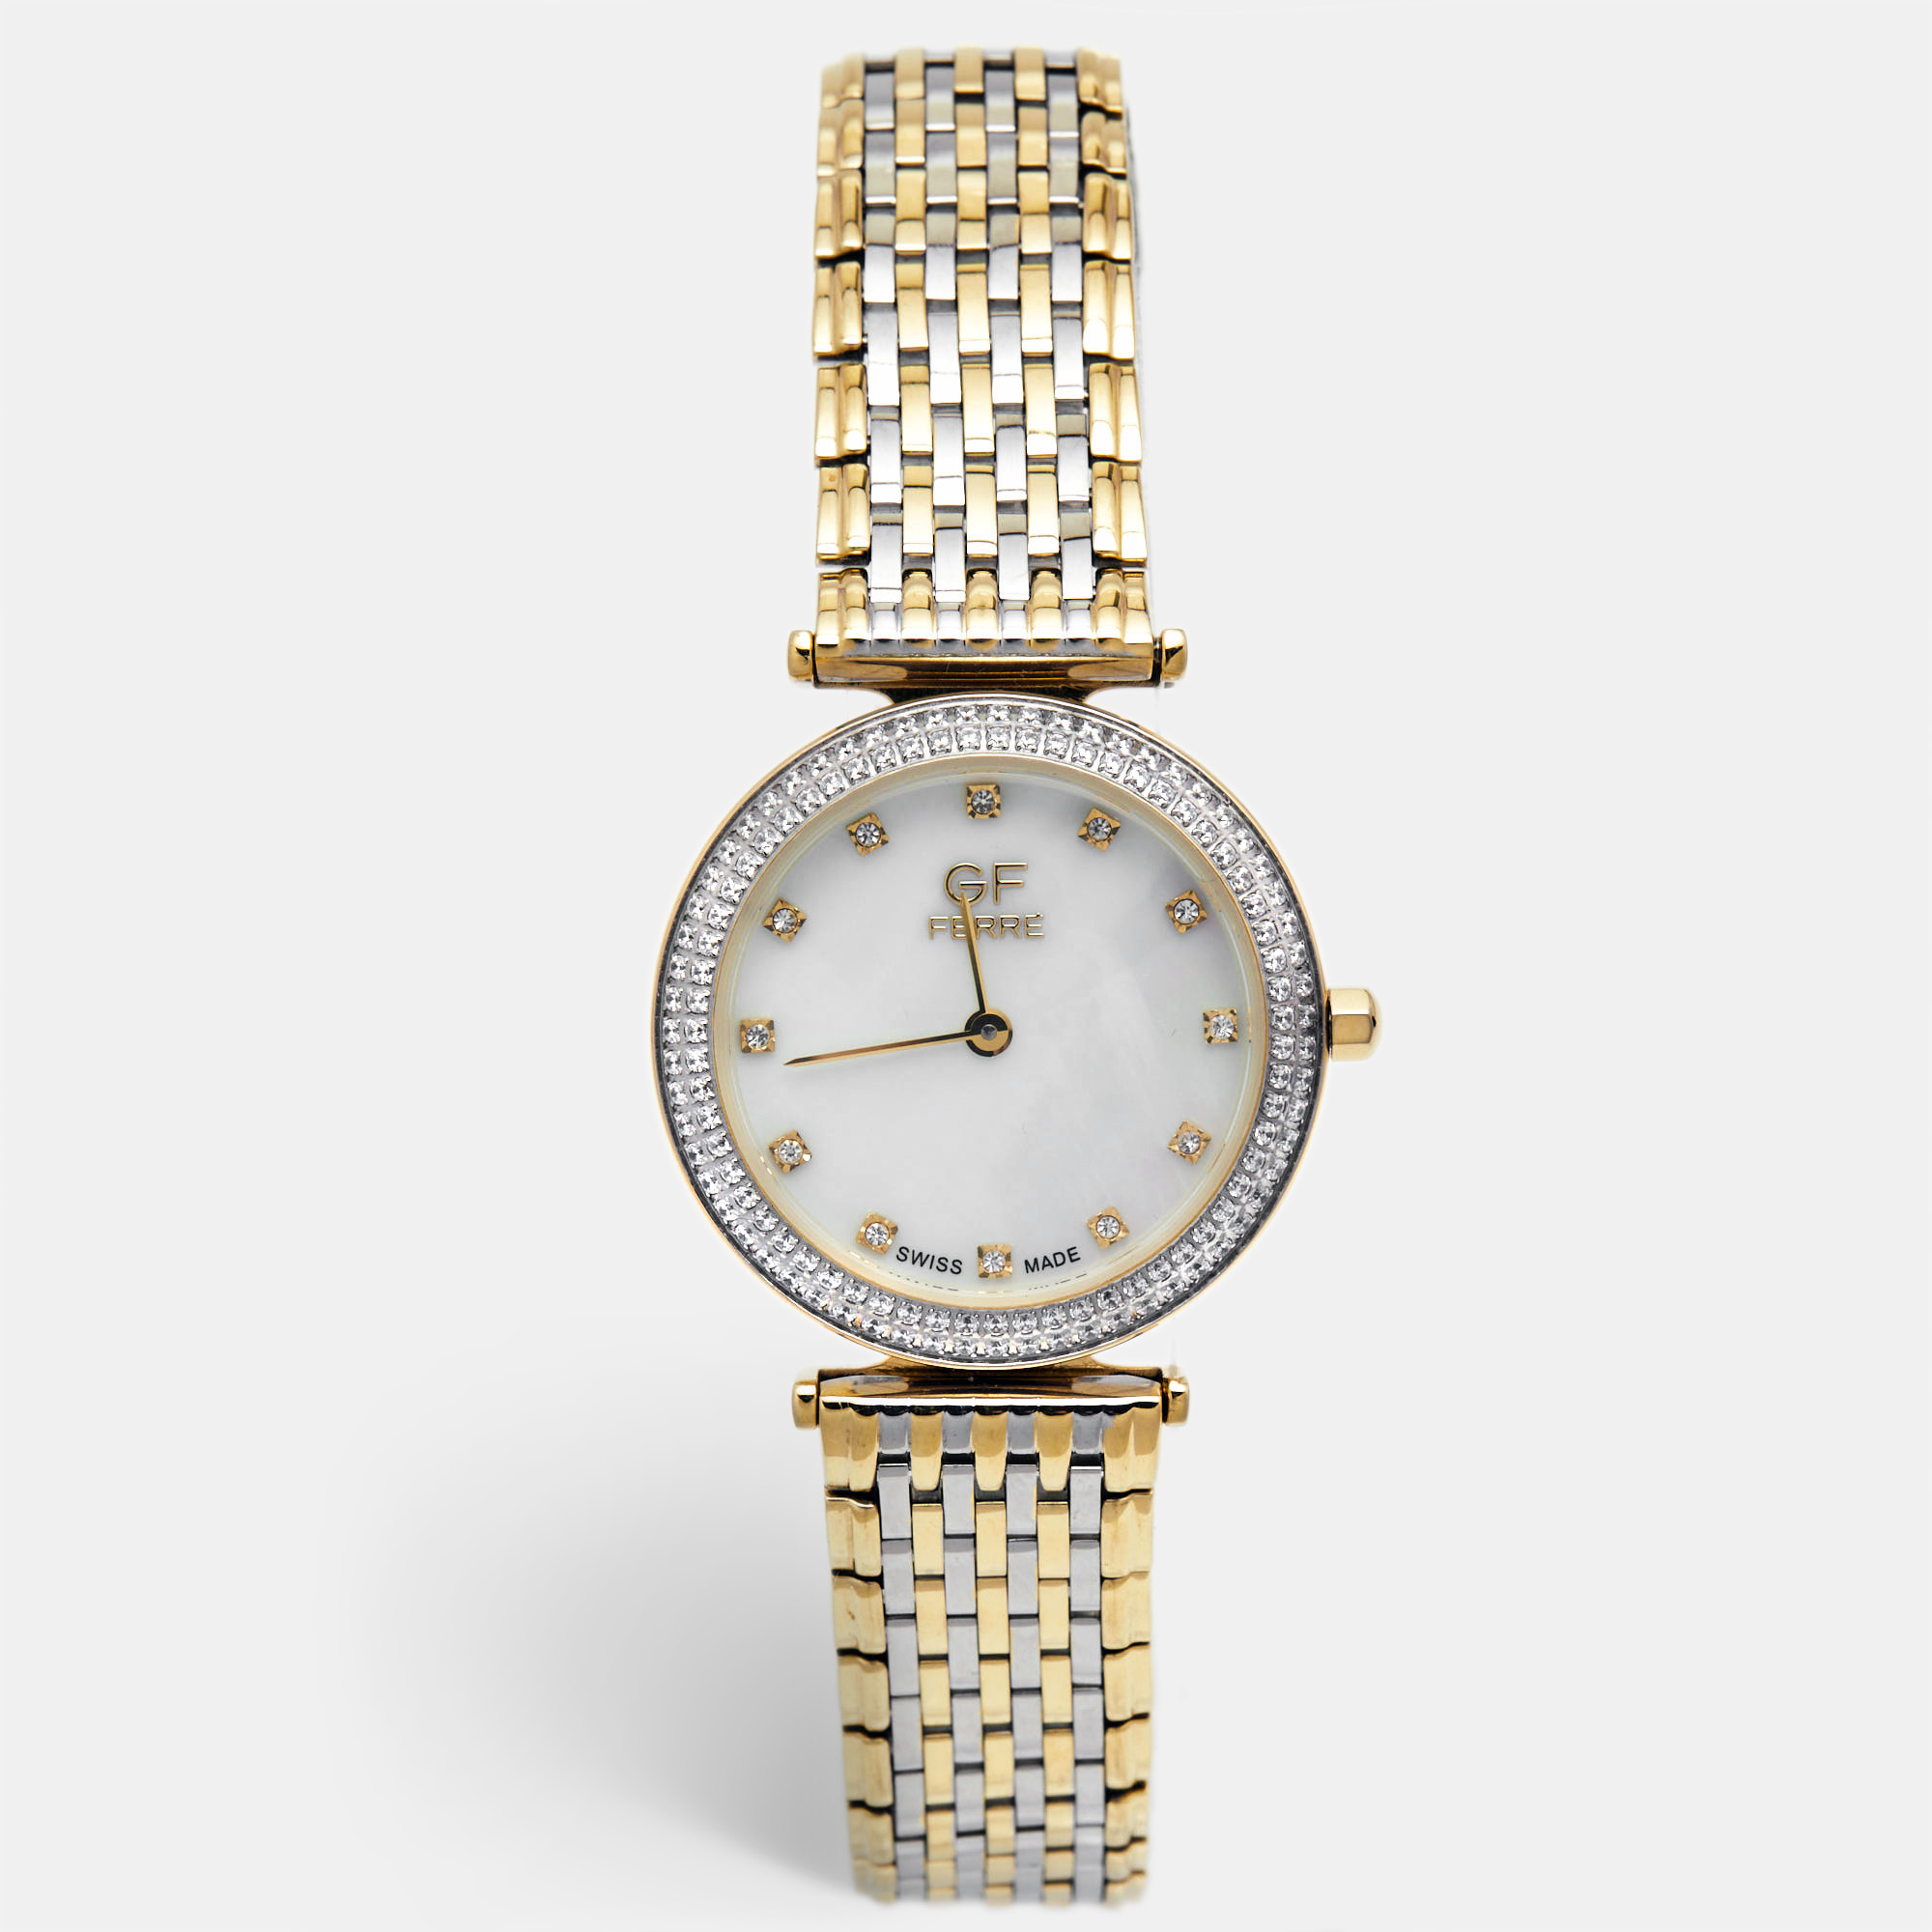 GF Ferre Mother Of Pearl Crystal Embellished Two-Tone Stainless Steel GPGP7440.1.2 Women's Wristwatch 31.50 Mm